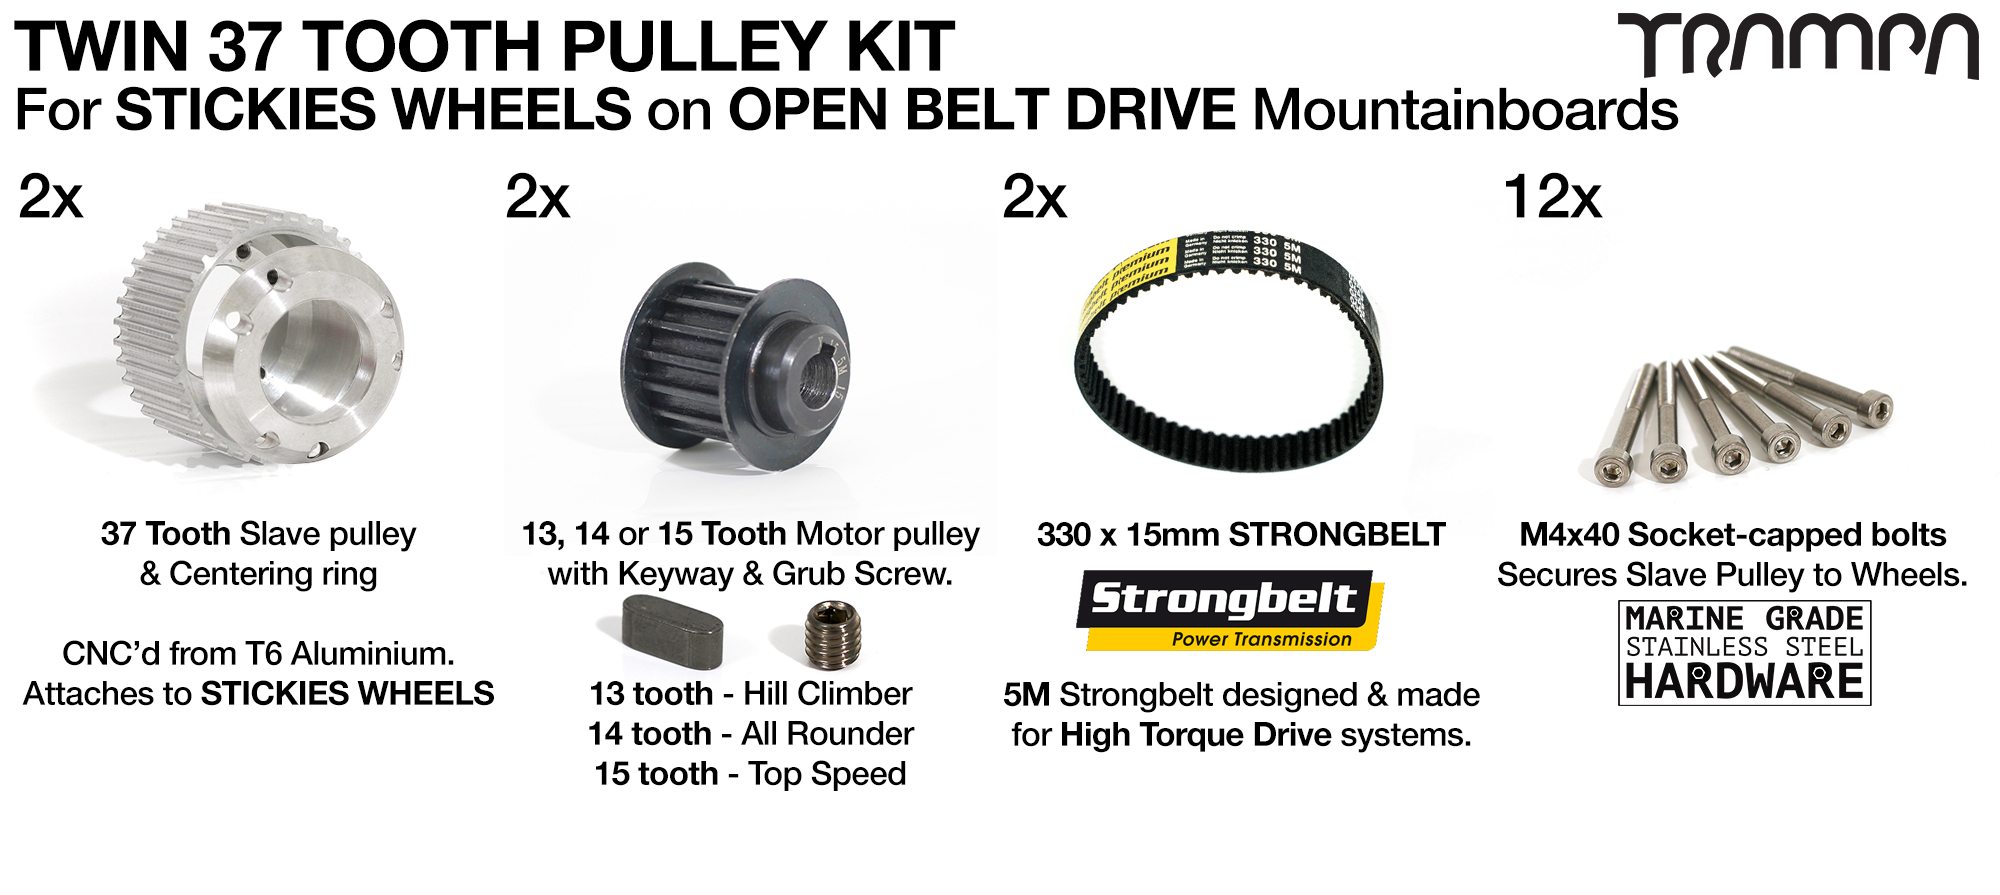 66T Open Belt Drive 83/90mm STICKIES Wheel 33/37 Tooth Pulley Kit with 330mm x 15mm Belt - TWIN